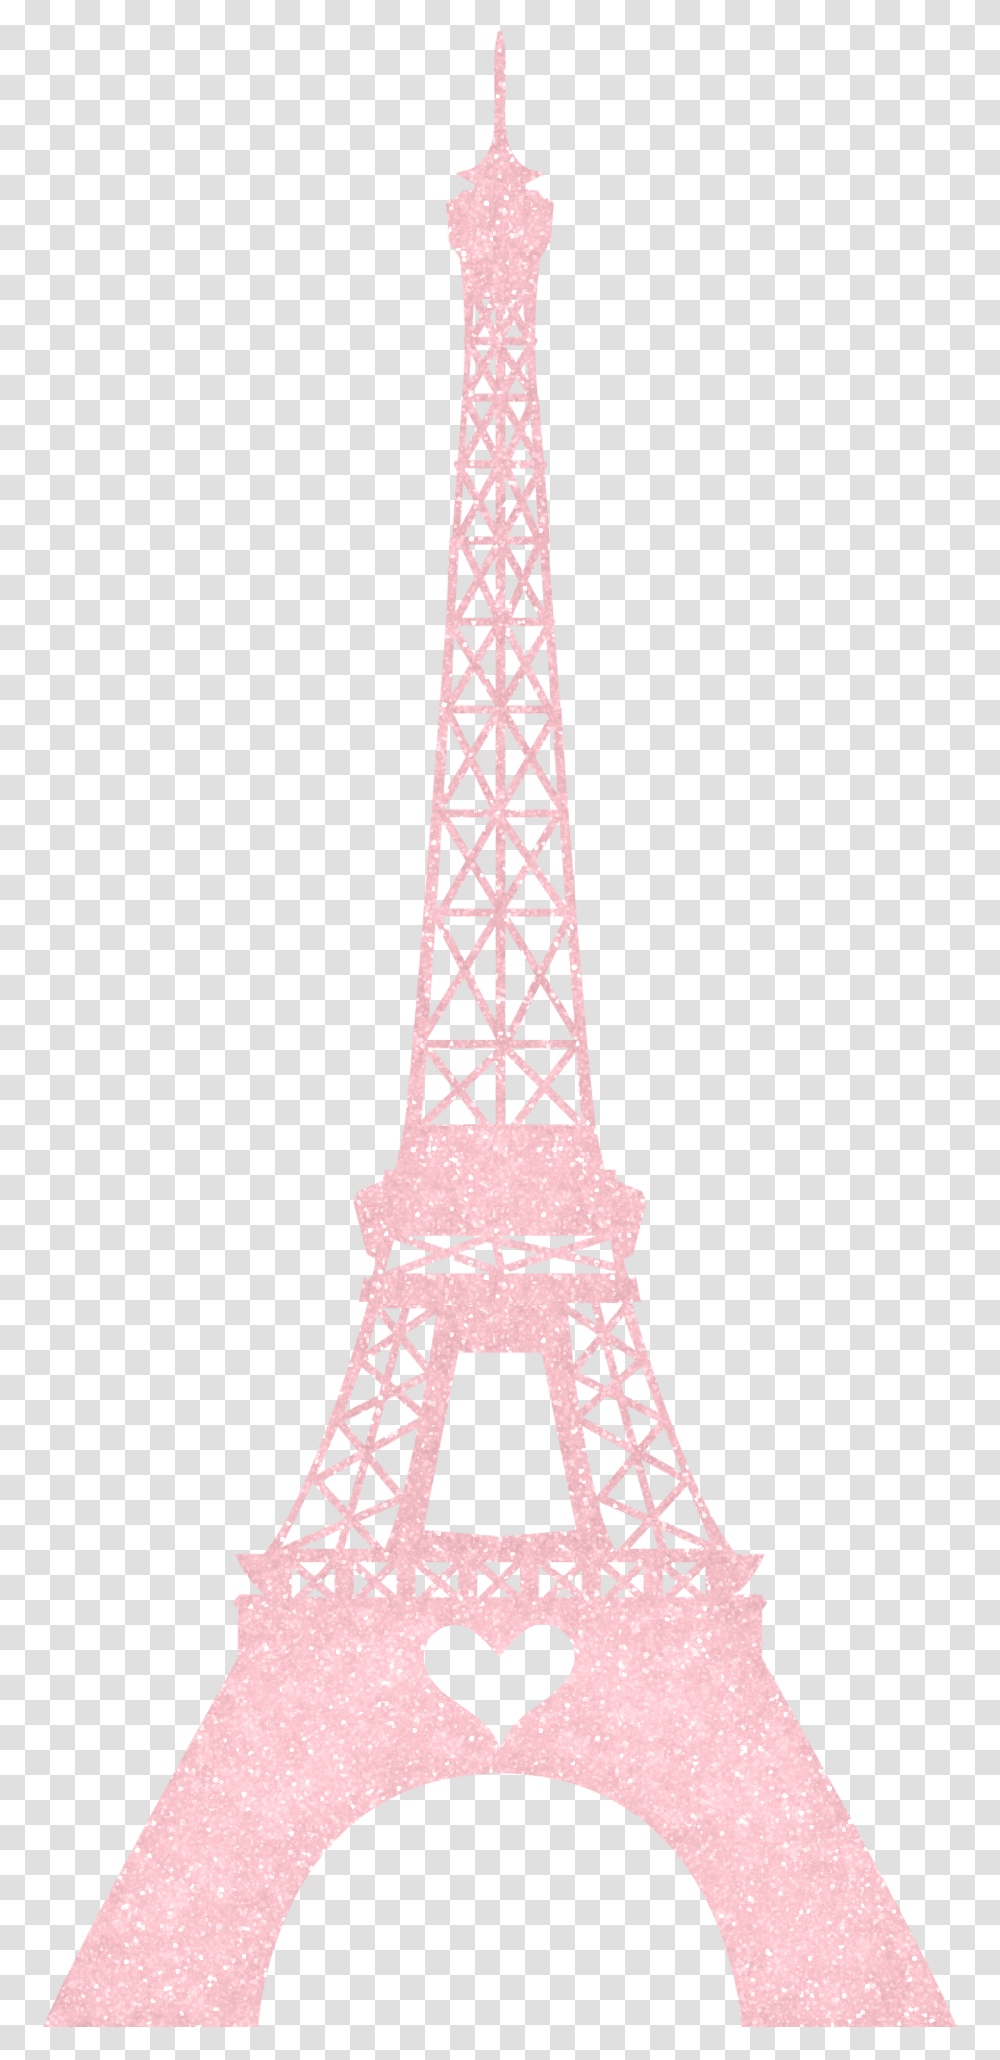 Library Of Eiffel Tower With Crown Svg Free Files 58 Tour Eiffel Restaurant, Tie, Accessories, Accessory, Necktie Transparent Png